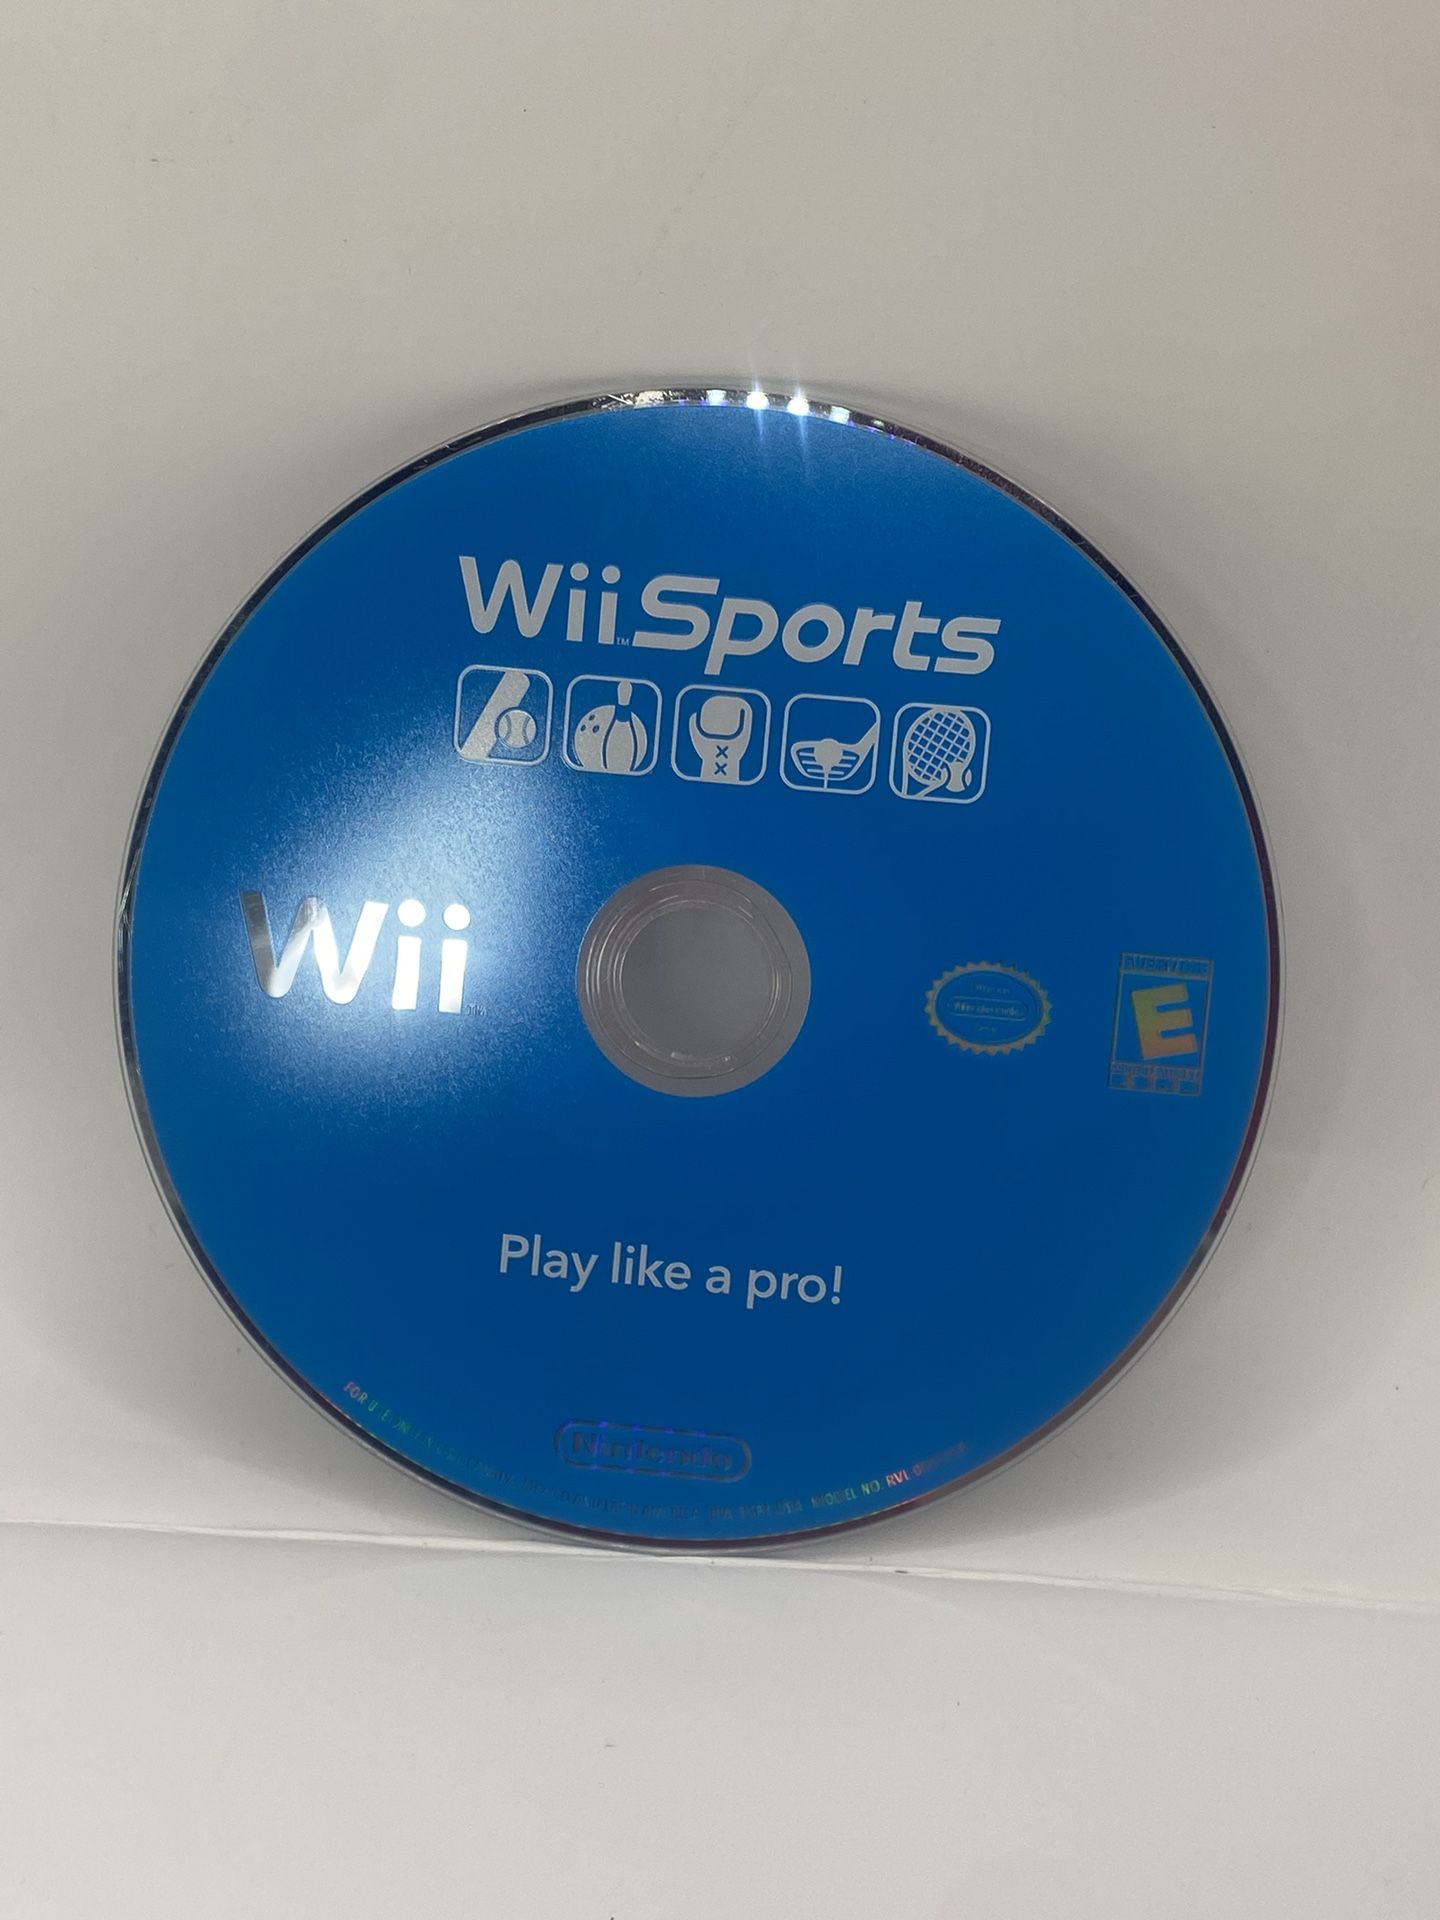 Wii Sports (Nintendo Wii, 2006) DISK ONLY! Tested! Bowling Golf Baseball Tennis